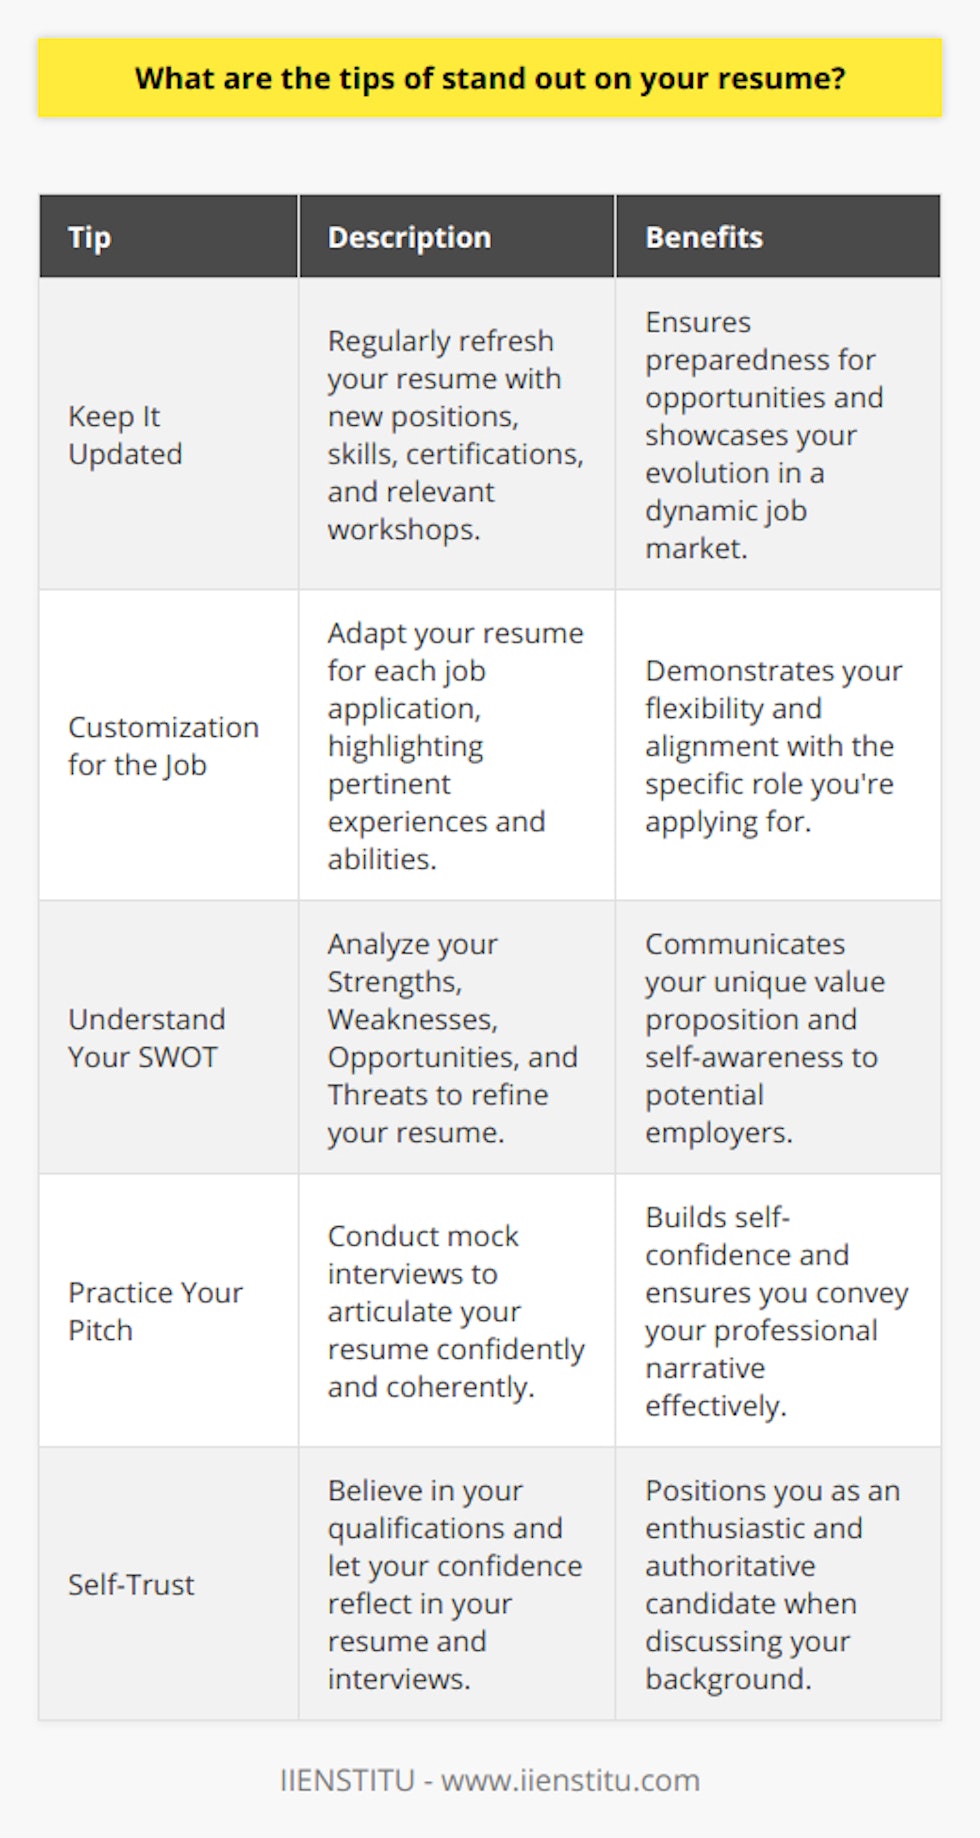 Creating an exceptional resume can set you apart in the job market, capturing the attention of potential employers. Here are some distinctive tips to ensure your resume not only stands out but also truly reflects your professional capabilities:1. Keep It Updated:A resume that reflects the most current version of your professional journey is essential. Update your resume regularly to include recent job positions, newly acquired skills, and certifications or workshops that you've attended. Even if you are not actively job-hunting, having an updated resume on hand allows you to be ready for unforeseen opportunities that may arise. It's also crucial in a dynamic job market where industries and job roles are rapidly evolving, so your resume should keep pace.2. Be Prepared for Unexpected Things:Flexibility and adaptability are key in today's job market, and your resume should reflect that. Be prepared to customize your resume for different job postings by highlighting the most relevant experiences and skills for each position. Think about potential curveball questions that could arise from your resume in an interview and prepare thoughtful, confident responses.3. Know Your SWOT:Understanding your Strengths, Weaknesses, Opportunities, and Threats (SWOT) enables you to craft a resume that showcases your best traits while also being honest about areas for improvement. Emphasize the unique strengths that set you apart from other candidates and identify opportunities your skillset could open up for prospective employers. This self-awareness demonstrates to hiring managers that you are reflective and strategic about your professional development.4. Practice and Trust Yourself:Confidence is crucial, and one way to build it is through practice. Conduct mock interviews with a focus on articulating your resume in a coherent and compelling way. Trust in your abilities and accomplishments—you've earned them. When you trust yourself, it's easier to speak about your experiences with enthusiasm and authority, which can make a big difference in how your resume is received.By adhering to these tips and ensuring your resume accurately portrays your professional narrative, you'll distinctly position yourself in the job market. Remember, your resume is more than a list of jobs and education; it’s a personal marketing tool that tells your professional story in a way that resonates with potential employers. In a world full of standard resumes, a thoughtful and well-prepared one is a testament to your dedication and personal brand. IIENSTITU, along with many other resources, can provide additional insights and tools to refine your resume and personal branding strategies to further differentiate you in your job search journey.